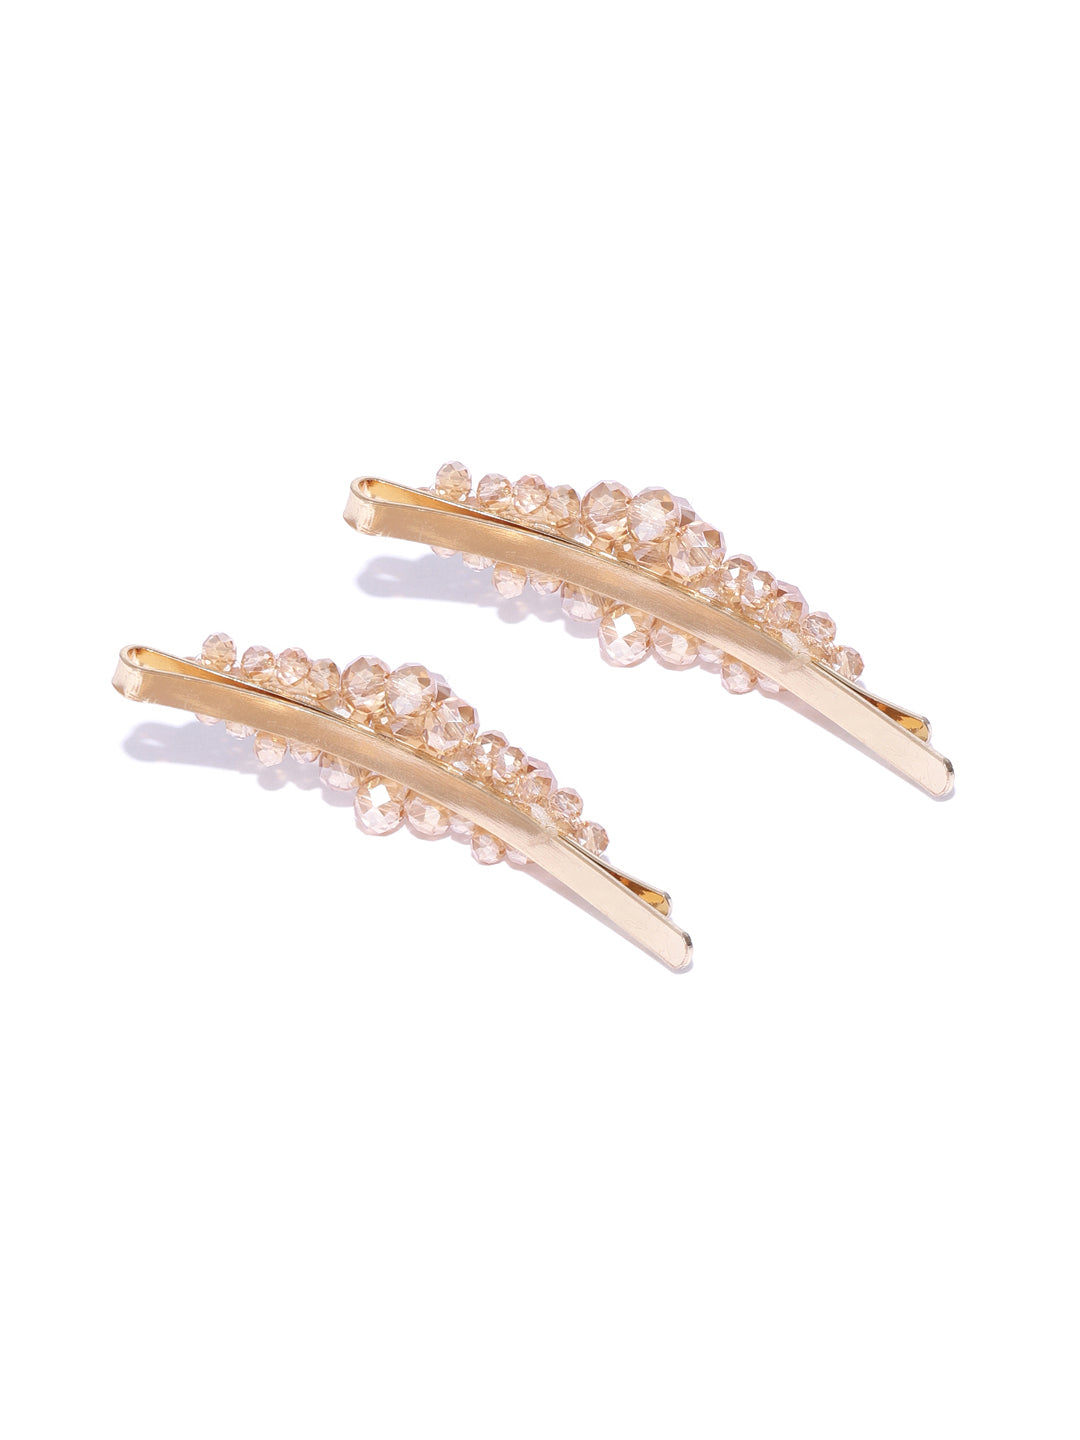 Blueberry set of 2 golden crystal beads detailing hair pins